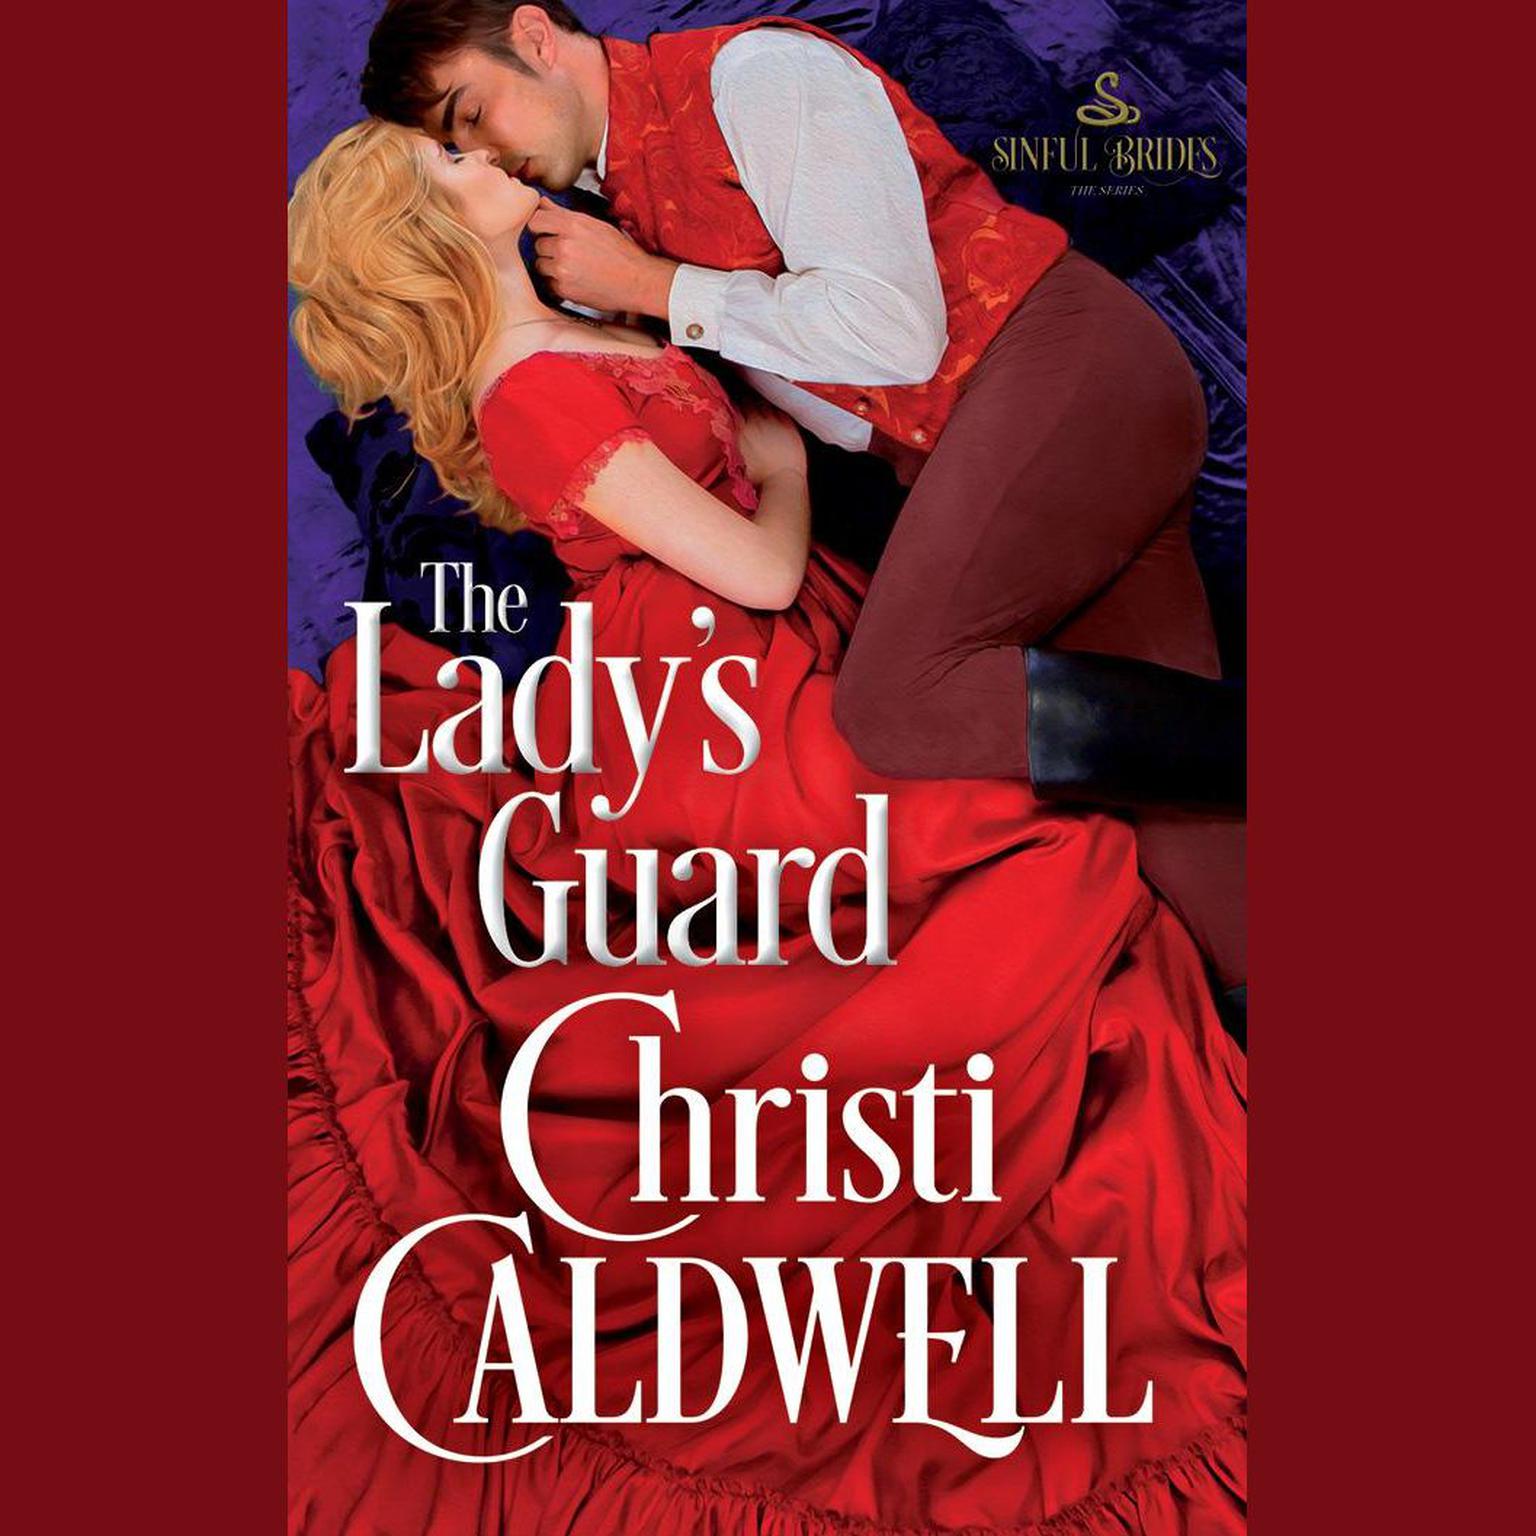 The Ladys Guard Audiobook, by Christi Caldwell